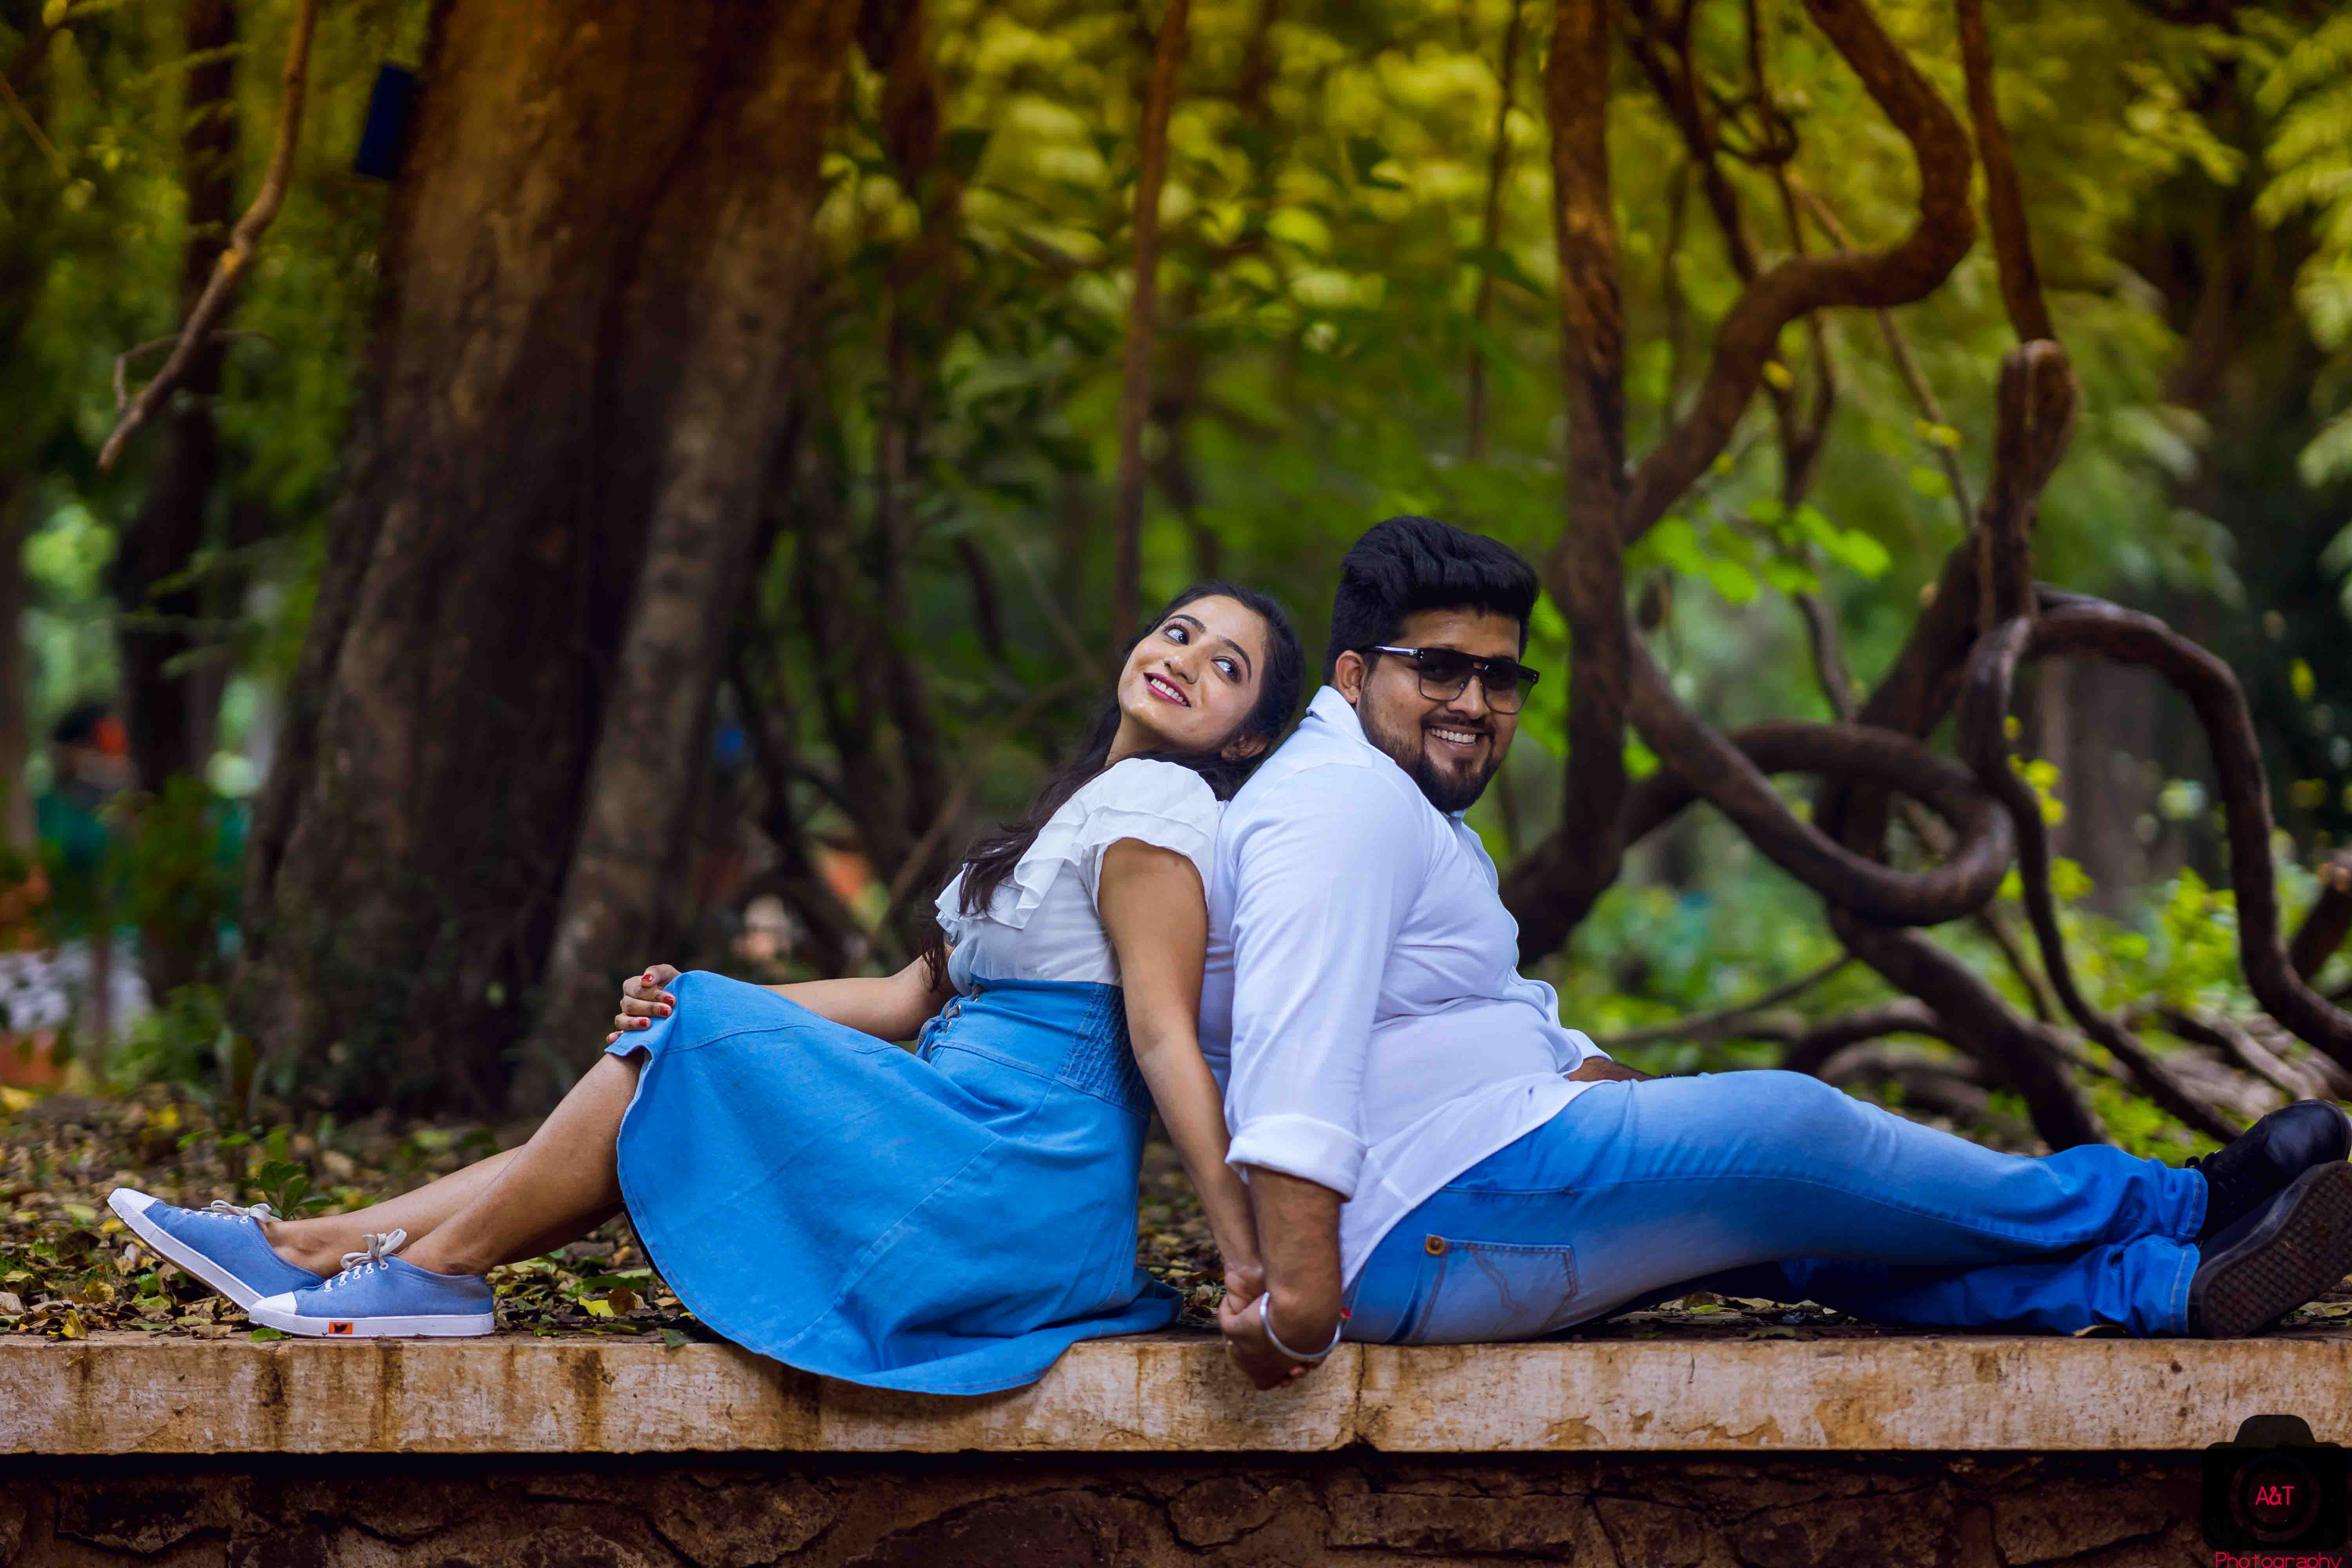 Lifestyle coupleshoot of Namrata & Anuraj in Pune, India where they are seating on bench